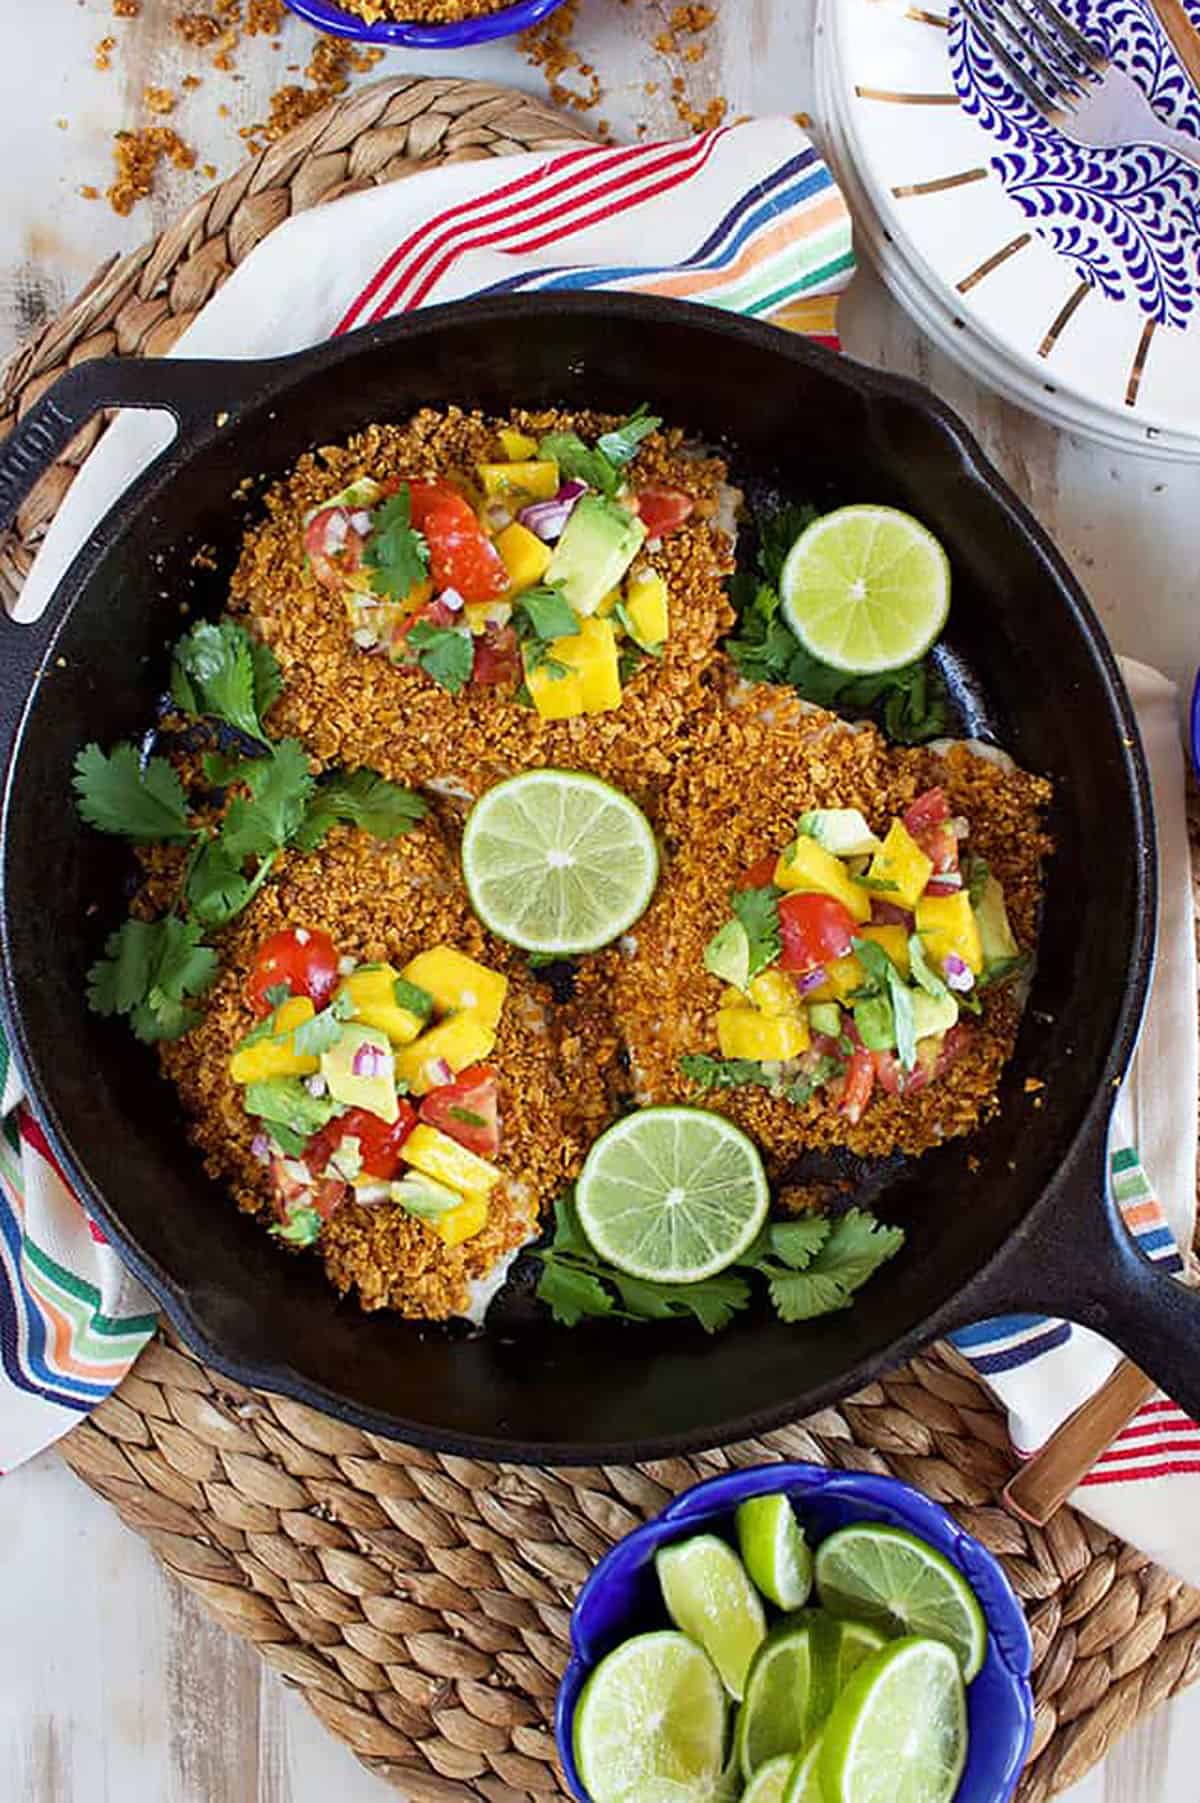 Tortilla crusted tilapia in a black cast iron skillet with sliced limes in a blue bowl.